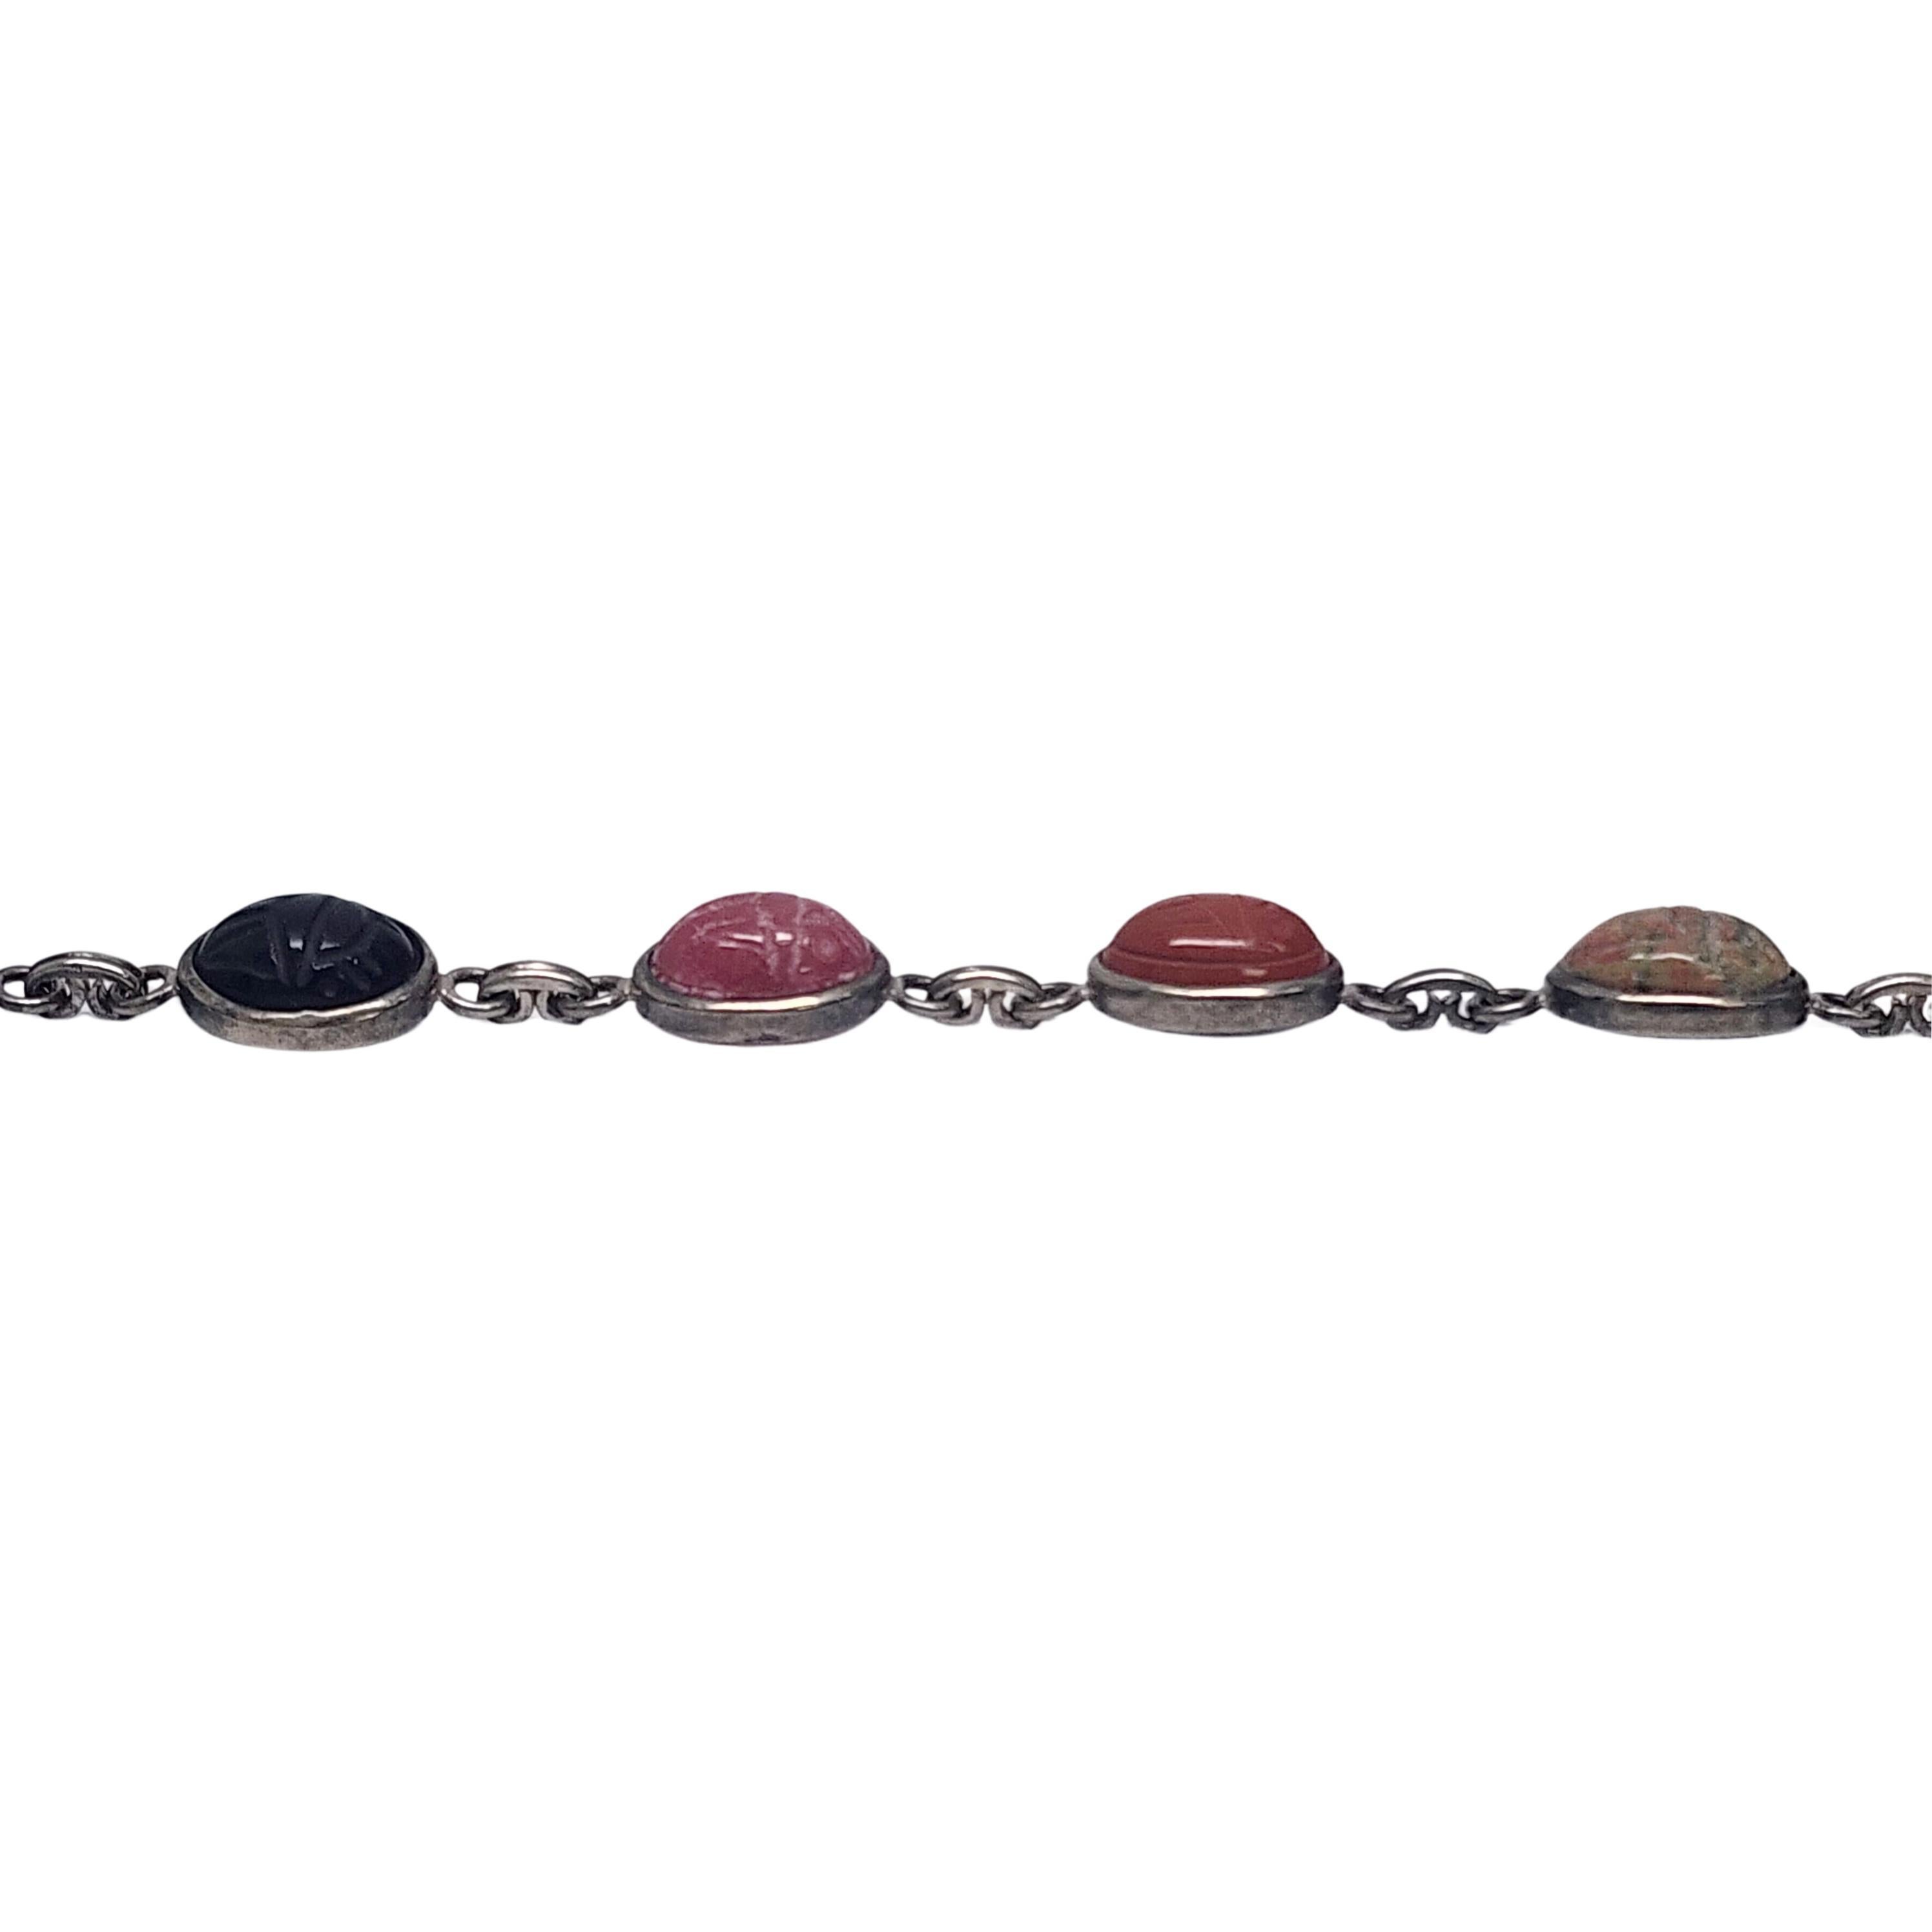 Vintage Sterling Silver Multi-Stone Scareb Bracelet #16489 In Good Condition For Sale In Washington Depot, CT